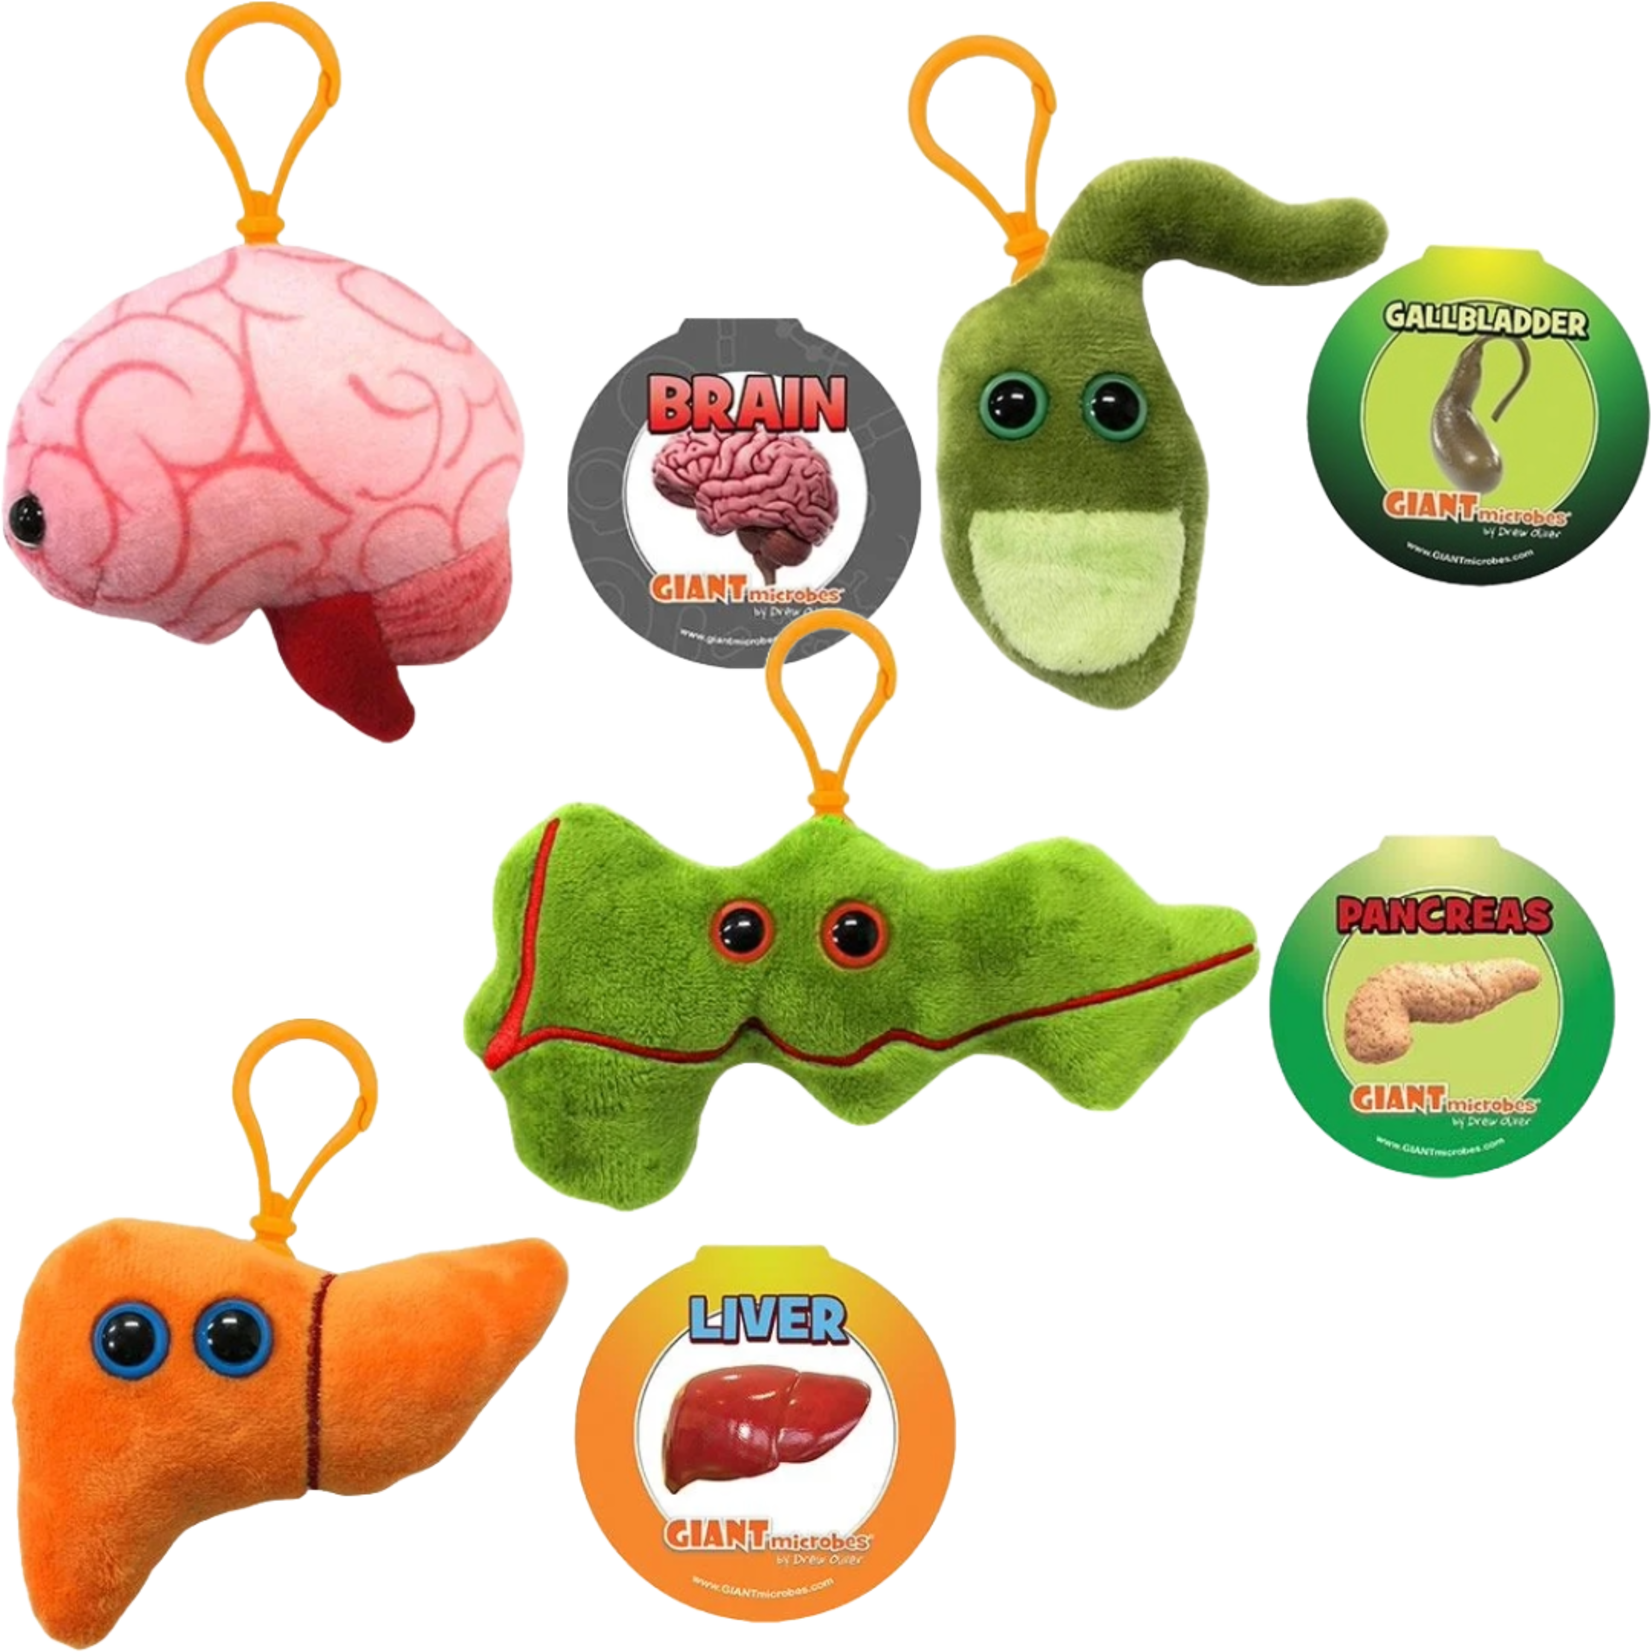 Giant Microbes Keychains